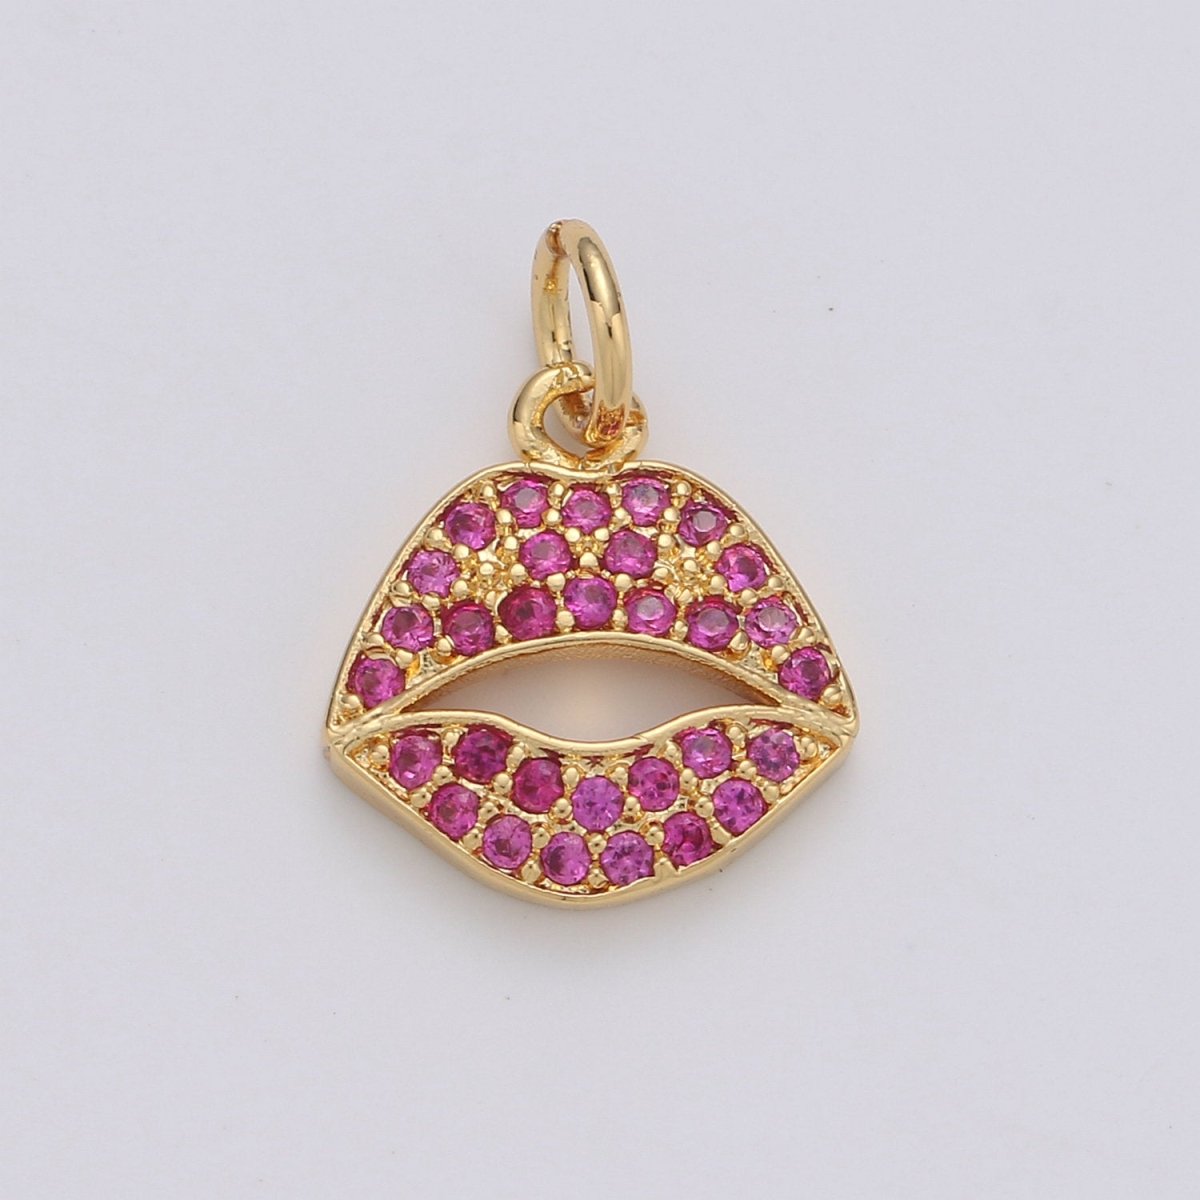 Micro Pave Pink Lips Charm in 14k Gold Filled for Bracelet Earring Necklace Charm Supply / Silver Lips Charm Kiss jewelry, D-188 D-189 - DLUXCA